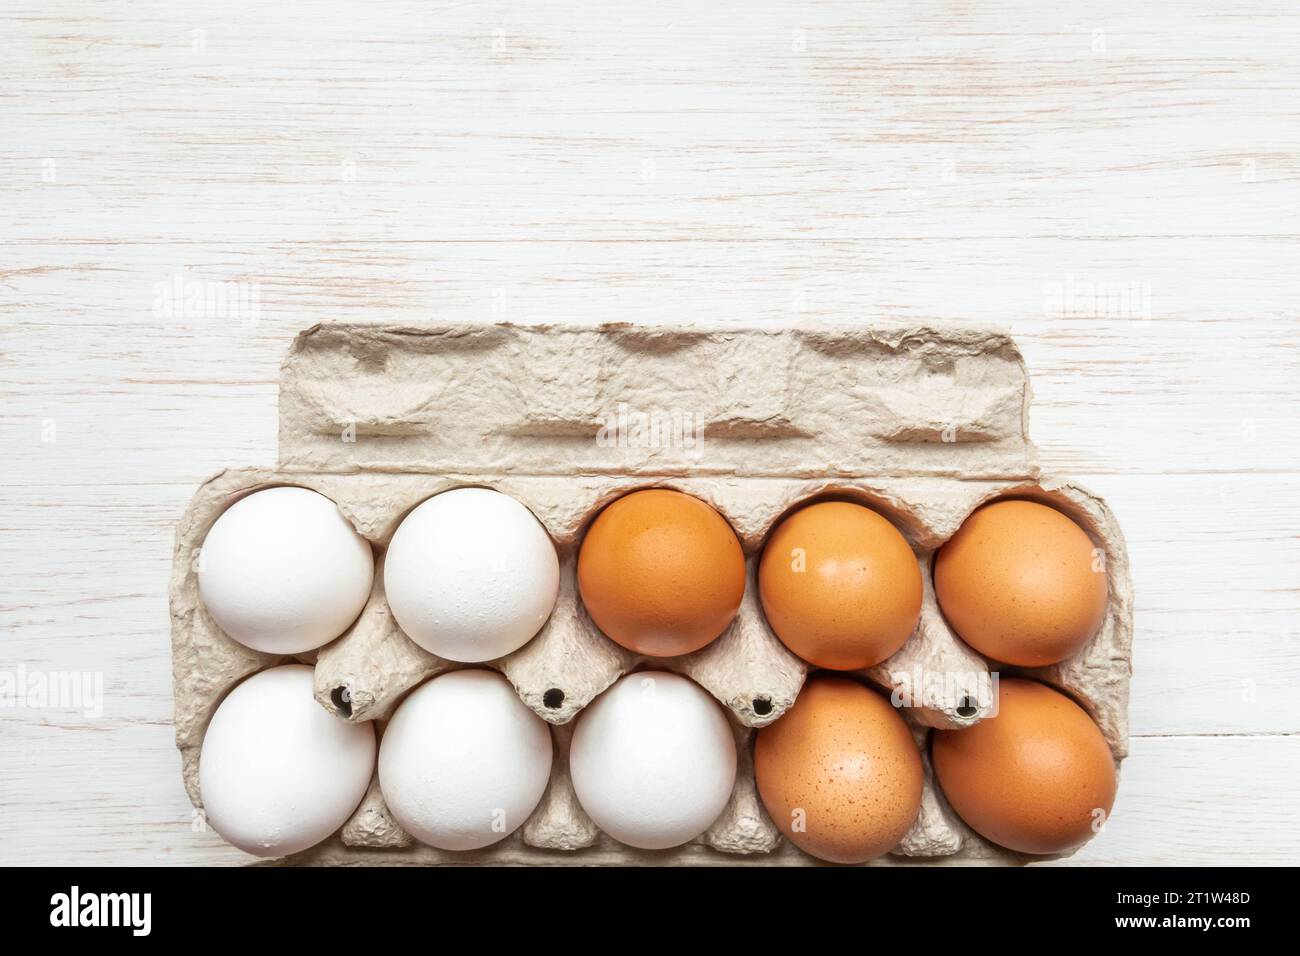 Brown and white eggs in open carton box. Fresh organic chicken eggs in carton pack on wooden surface. Top view with copy space. Natural healthy food a Stock Photo